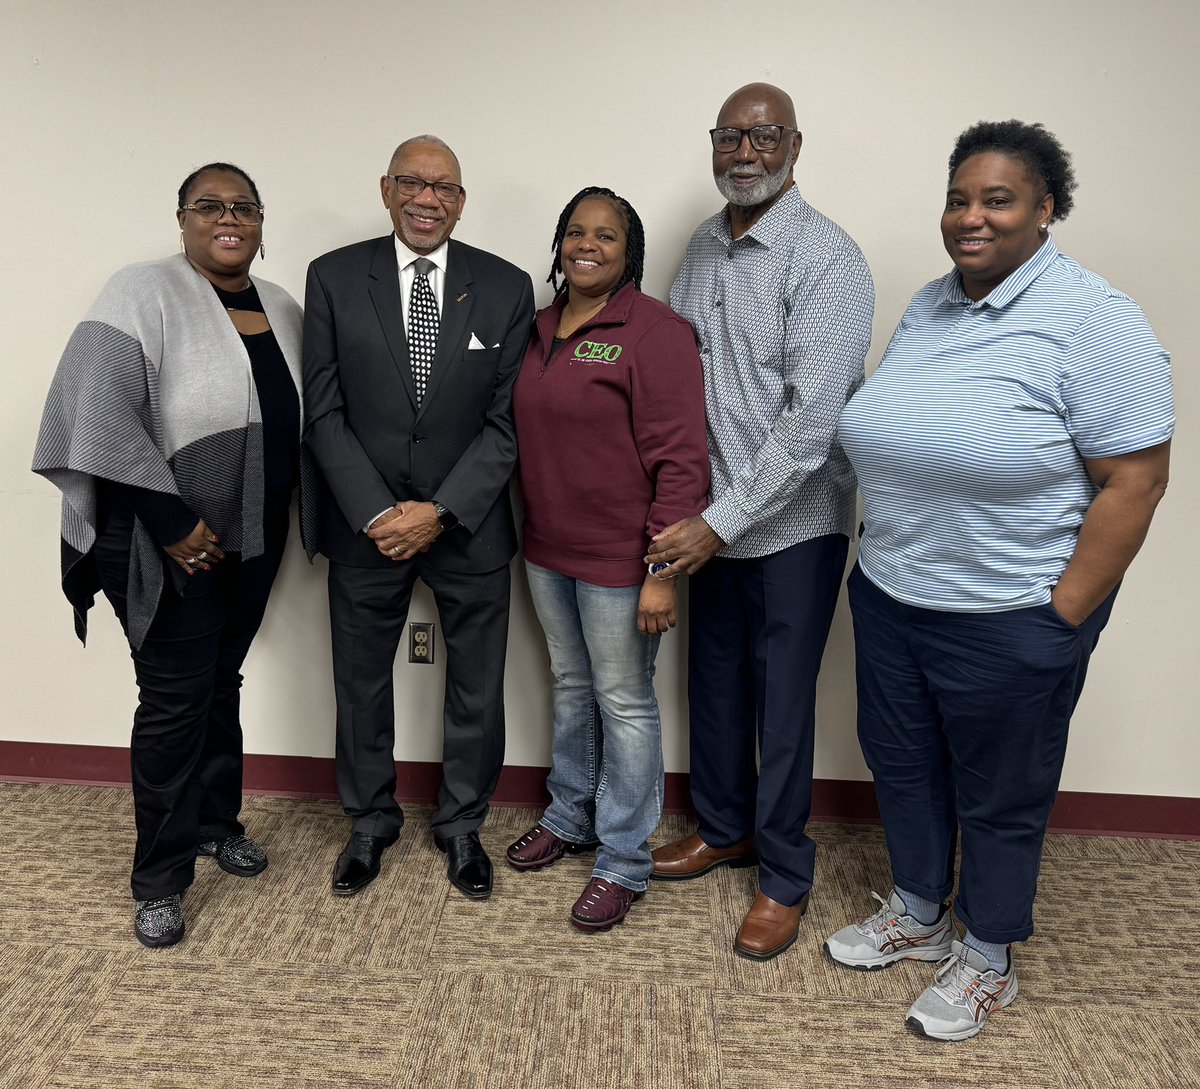 💜 CEO member leaders recently met with current Dayton mayor Jeffrey Mims and former Dayton mayor Clay Davis to discuss the state of #childcare in Dayton! 🙌🏽 We were excited to learn more about Mayor Jeffrey’s vision for improving childcare in his city. Thank you Mayor Jeffrey!